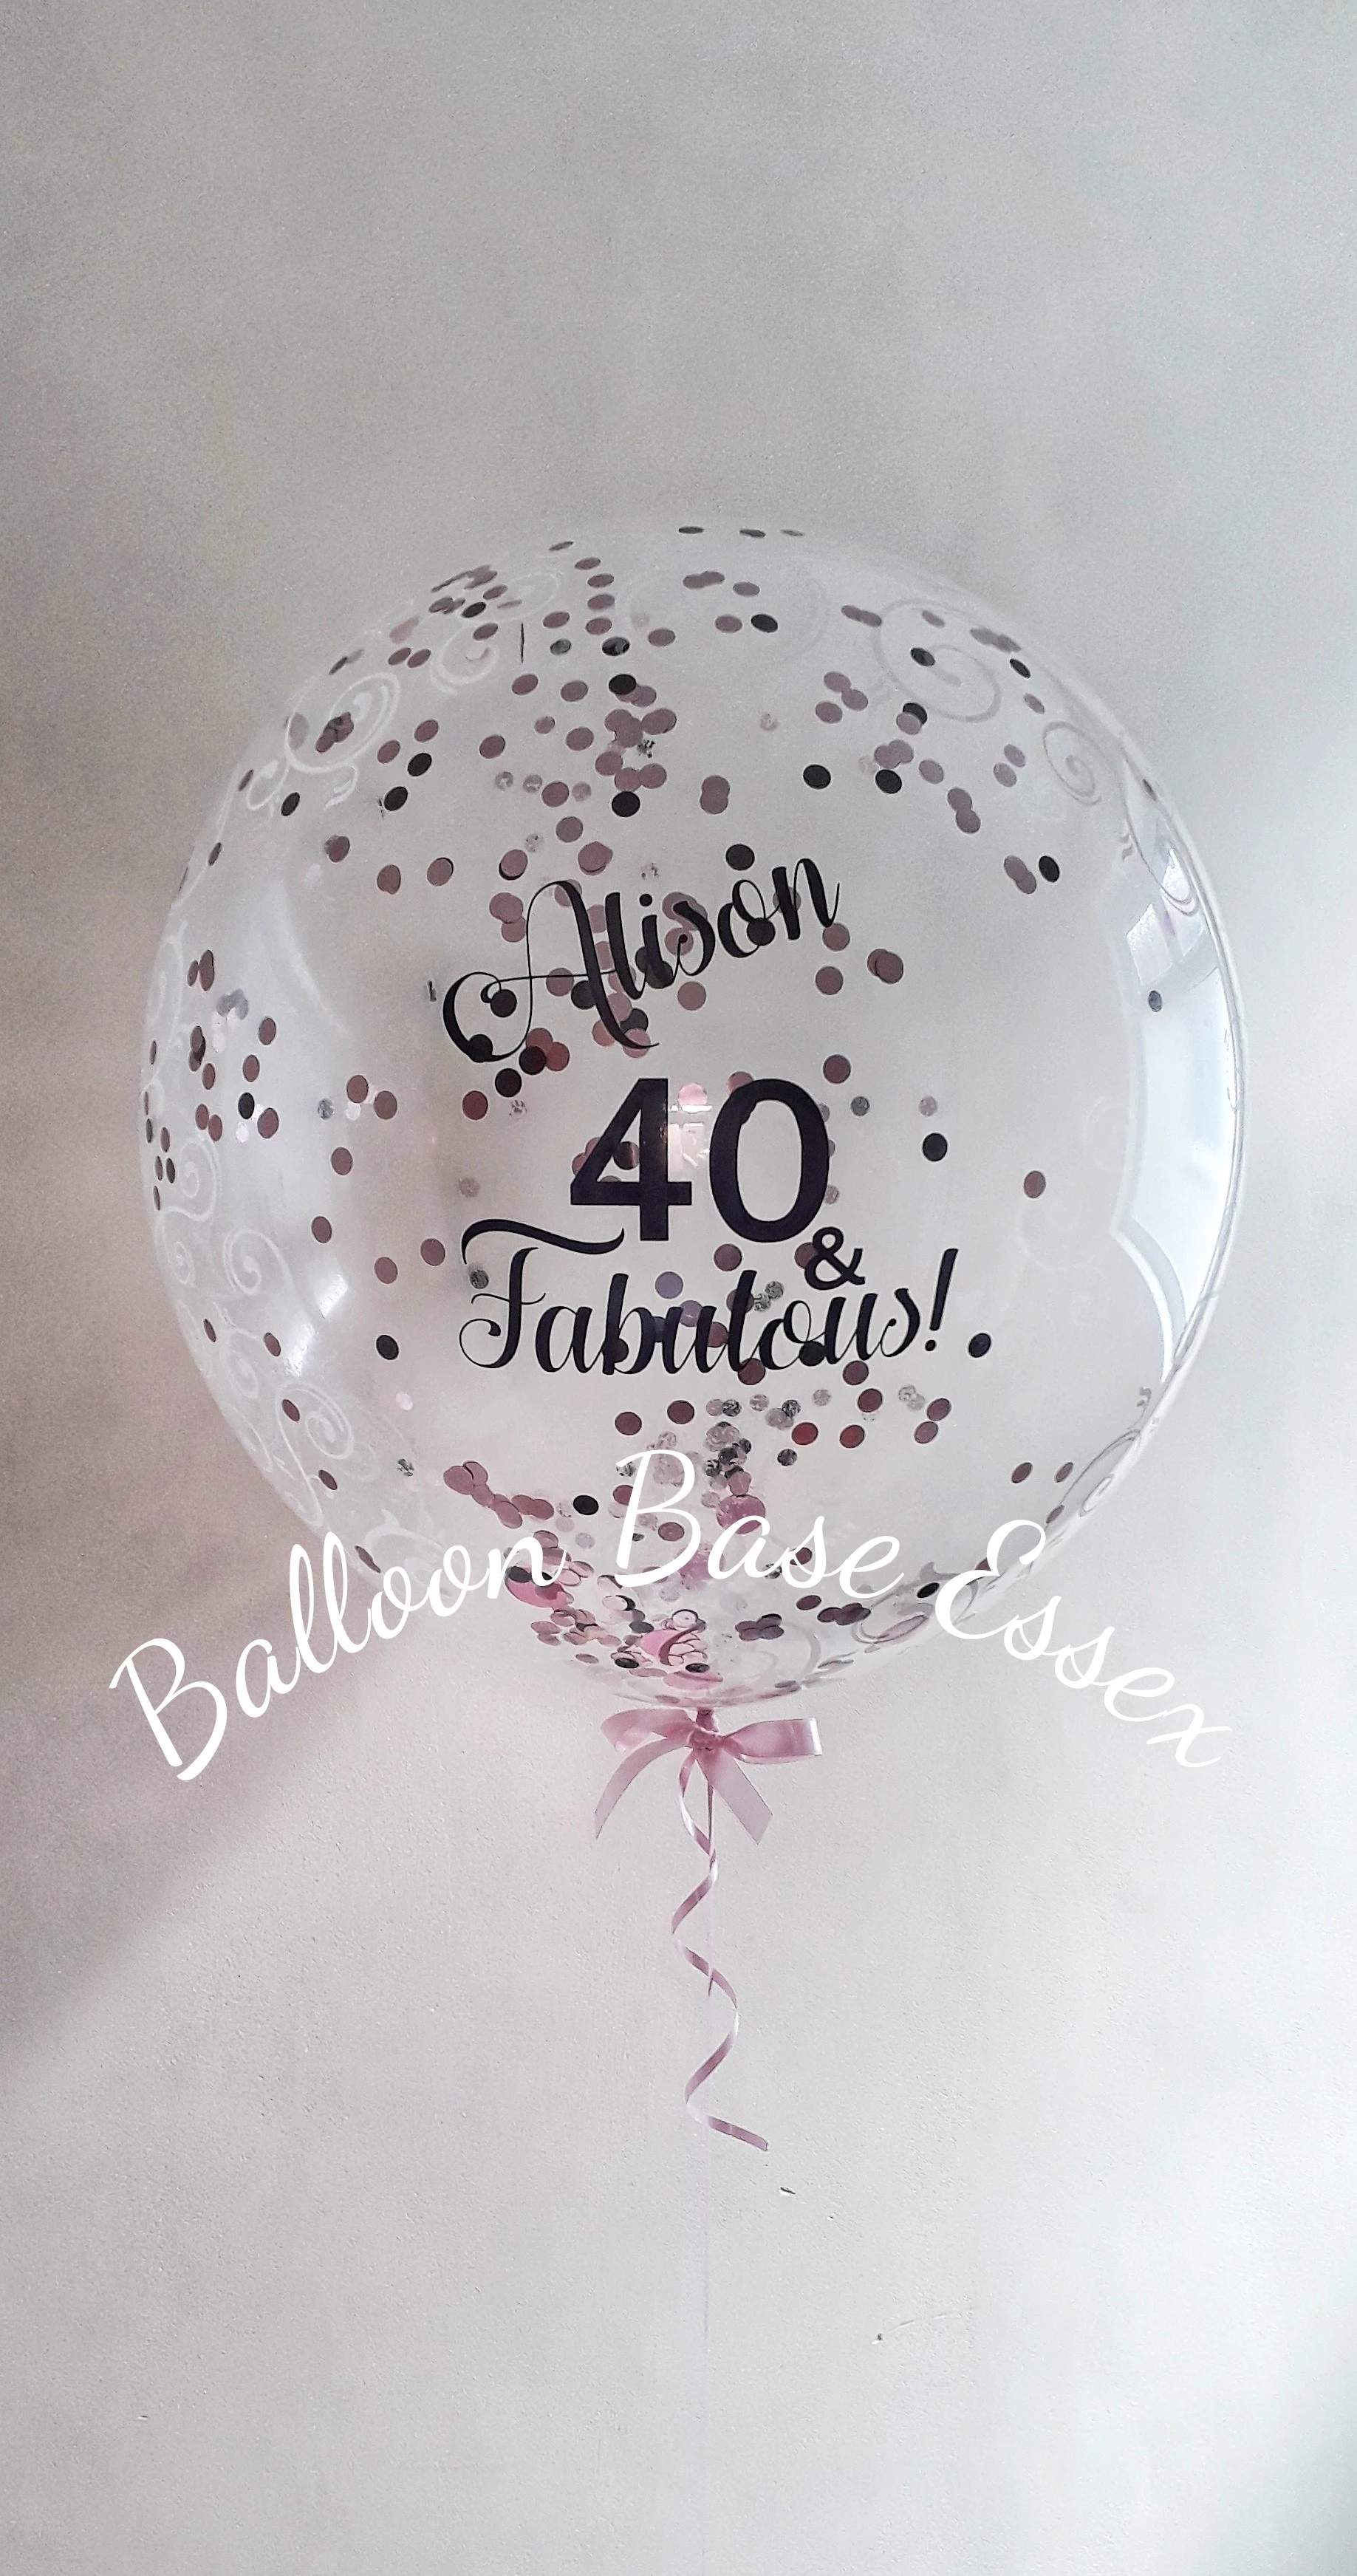 Clear bubble balloon with pink black and white confetti inside